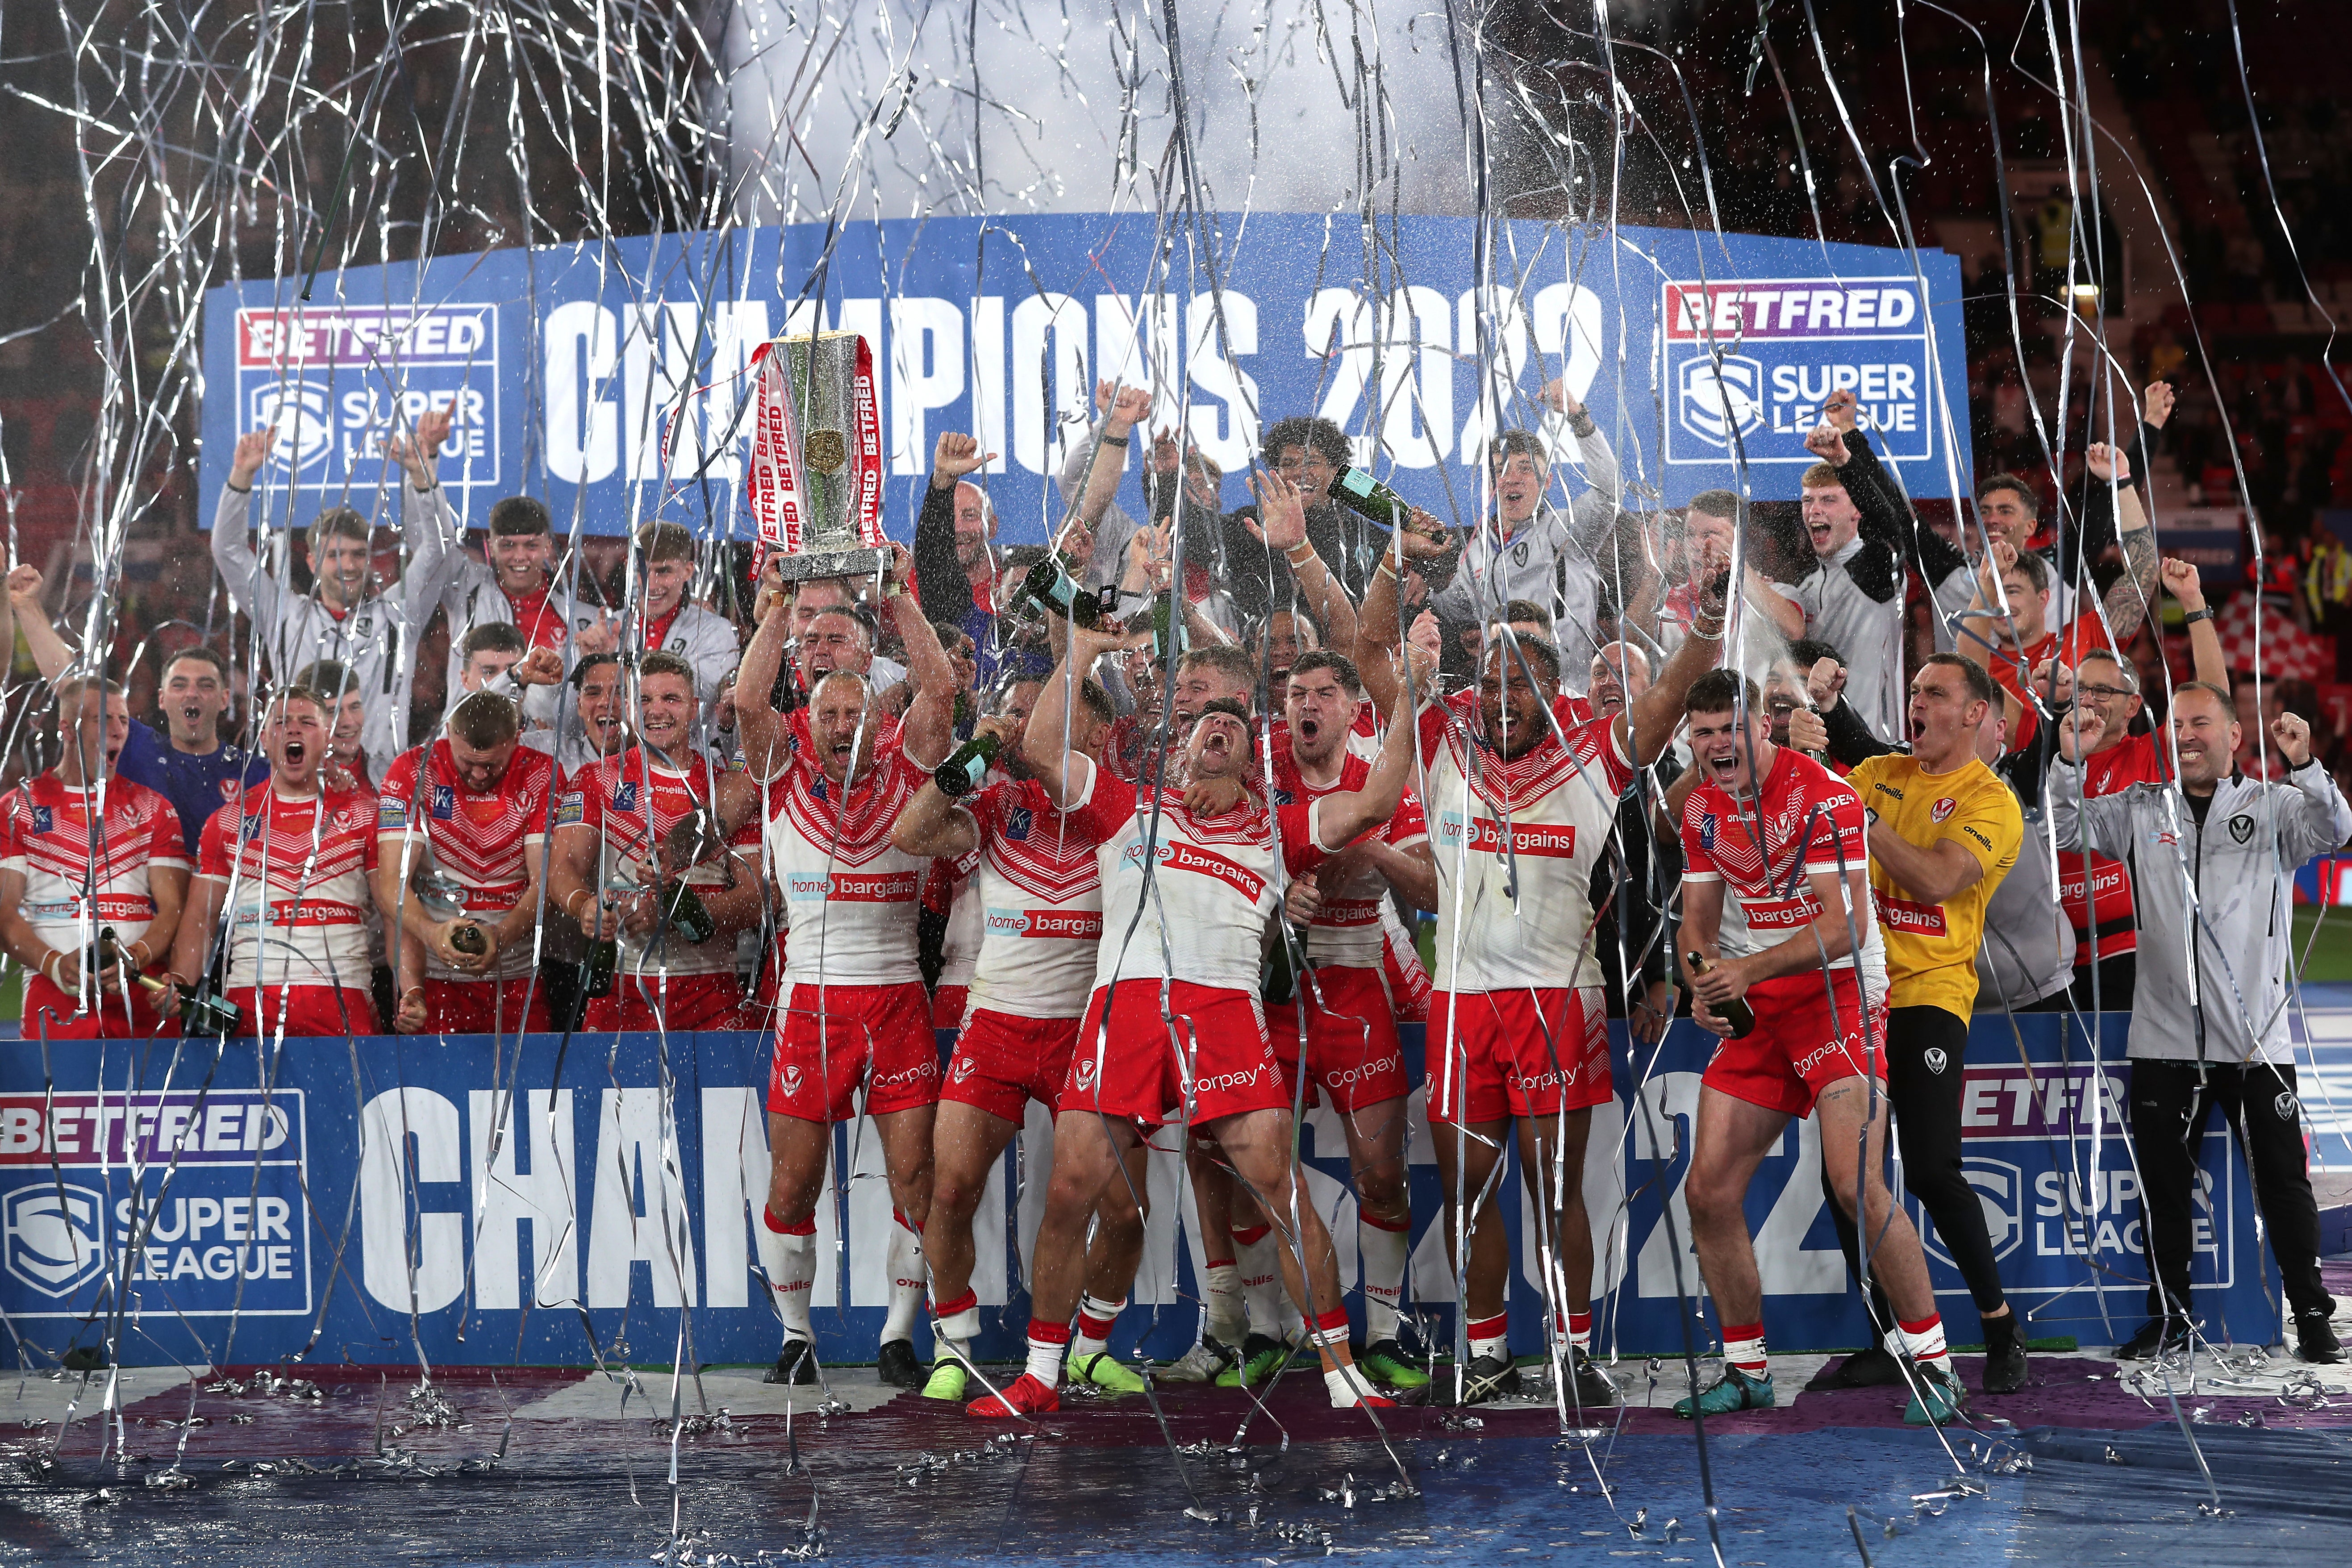 Champions St Helens will be effectively immune to relegation under new proposals (Richard Sellers/PA)